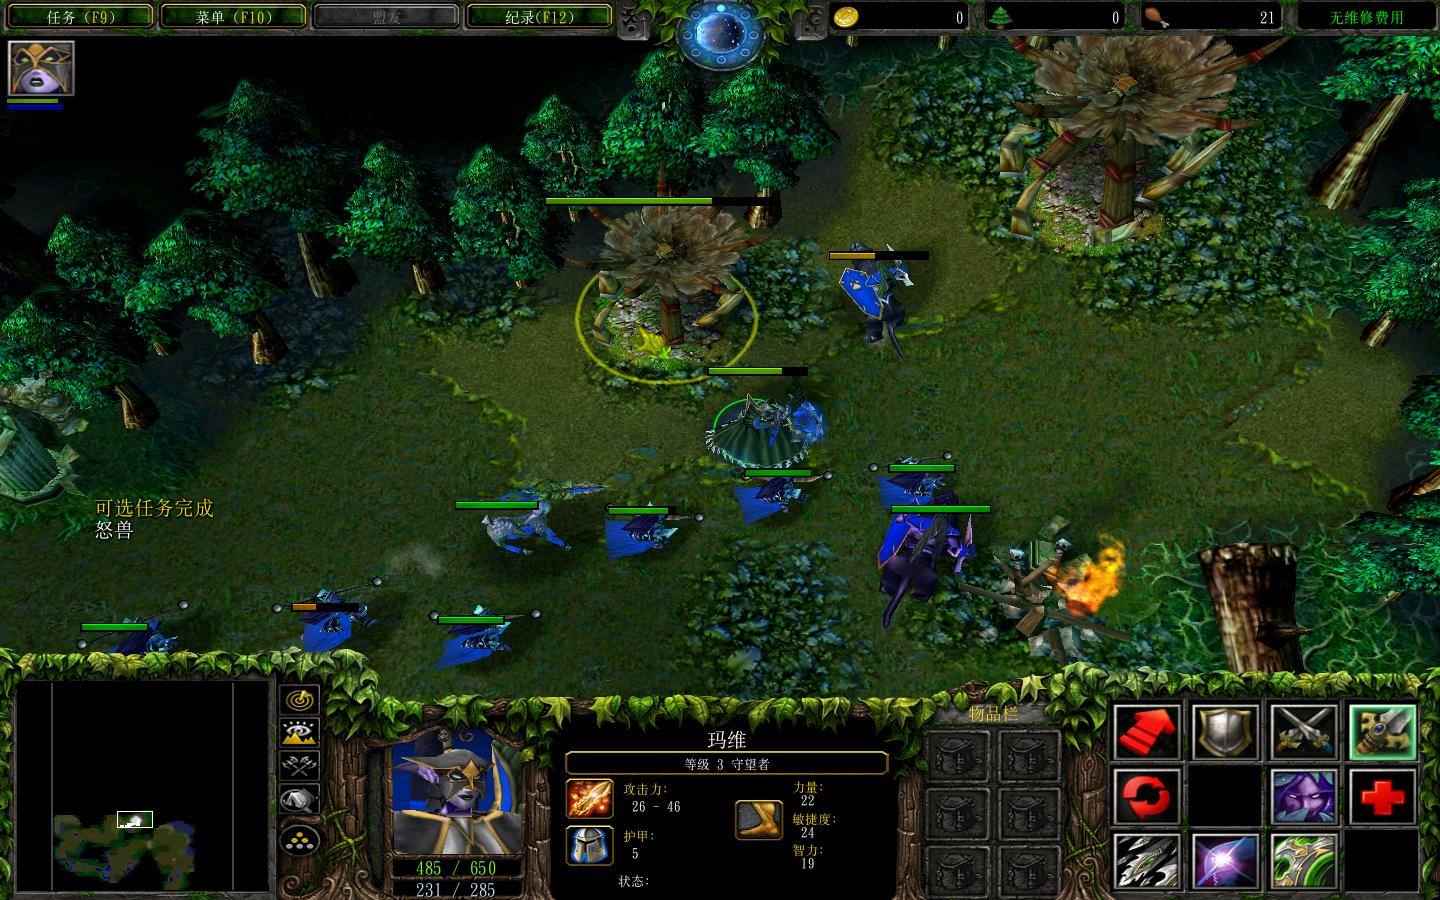 ħ3Warcraft III The Frozen Throne1.24ڤ v0.3